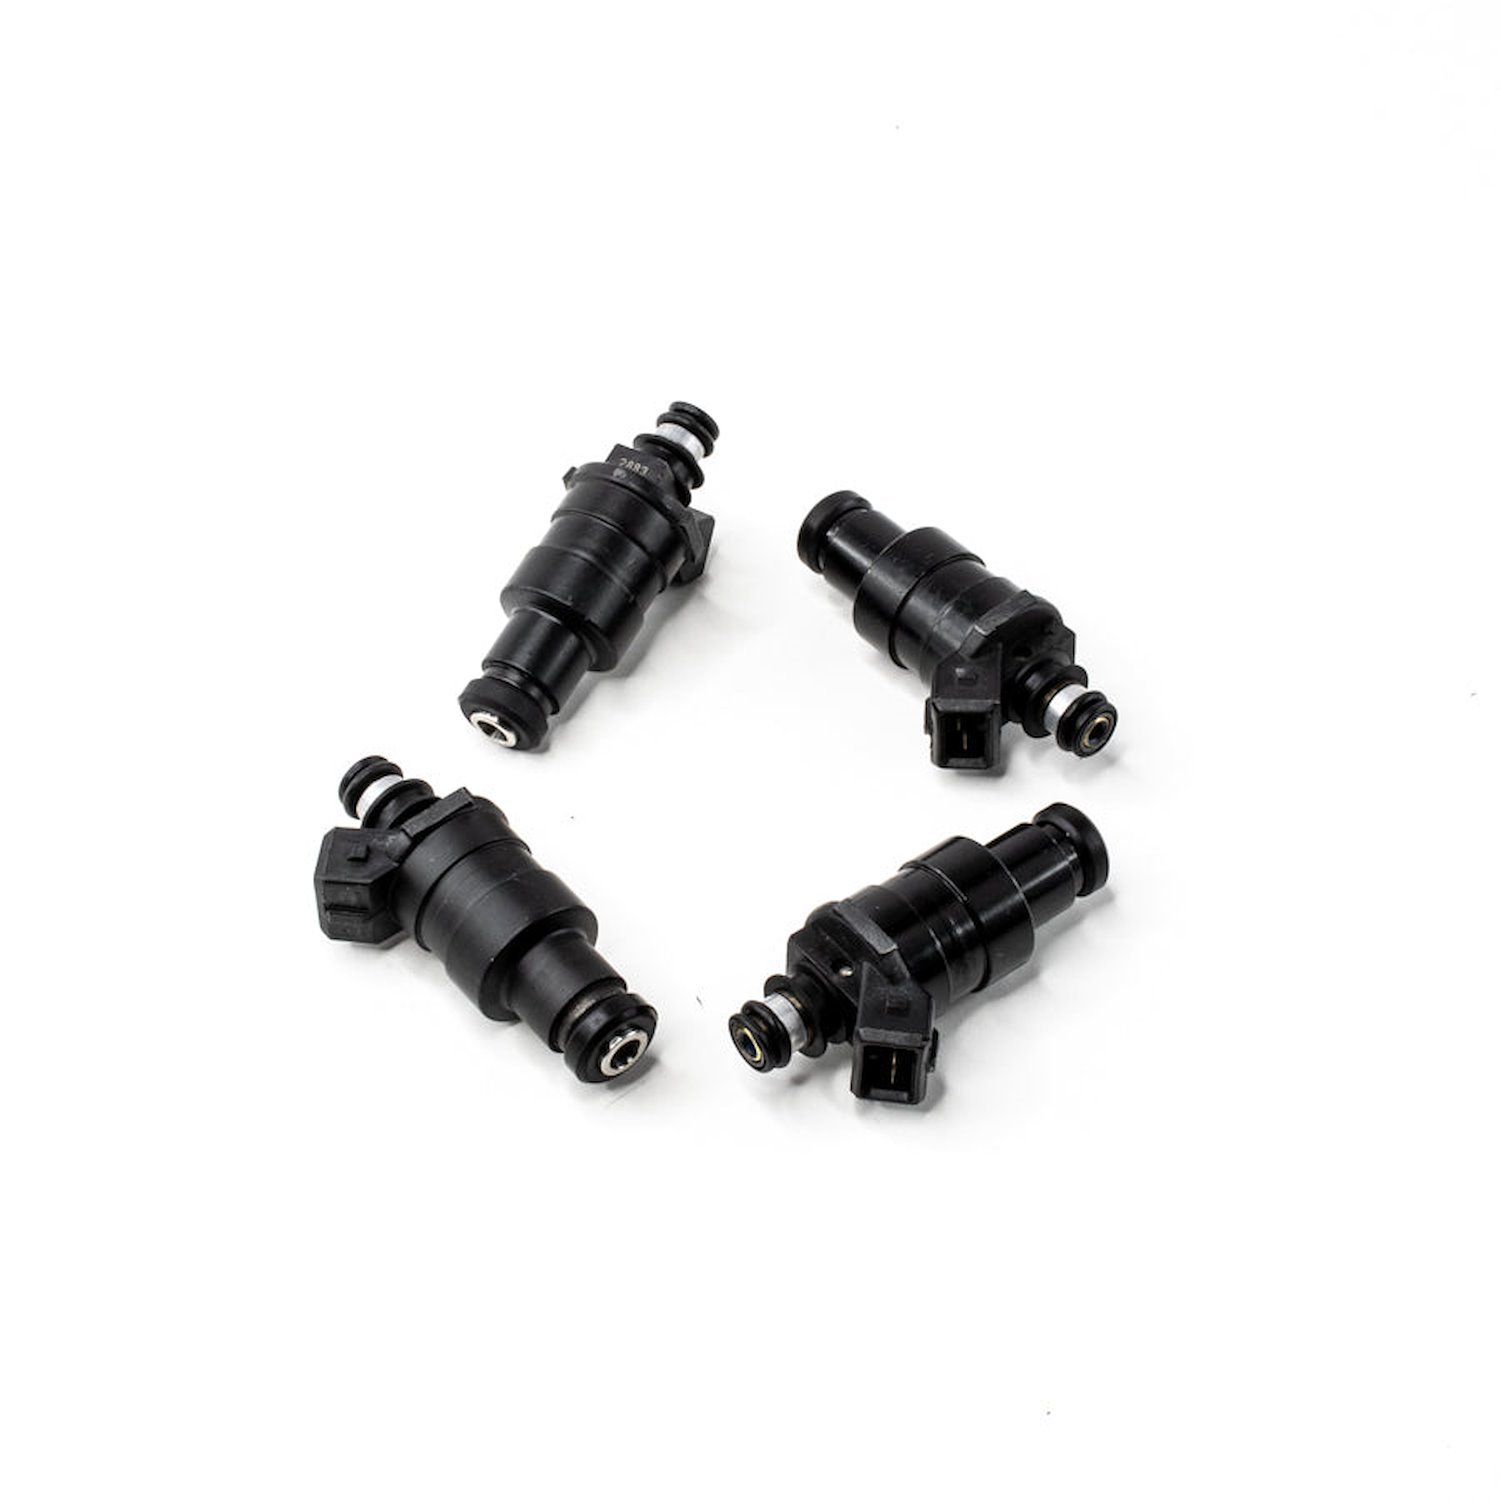 42M0205504  550cc Low Impedance Injectors for Mitsubishi Eclipse (DSM) 4G63T 95-99 and EVO 8/9 4G63T 03-06